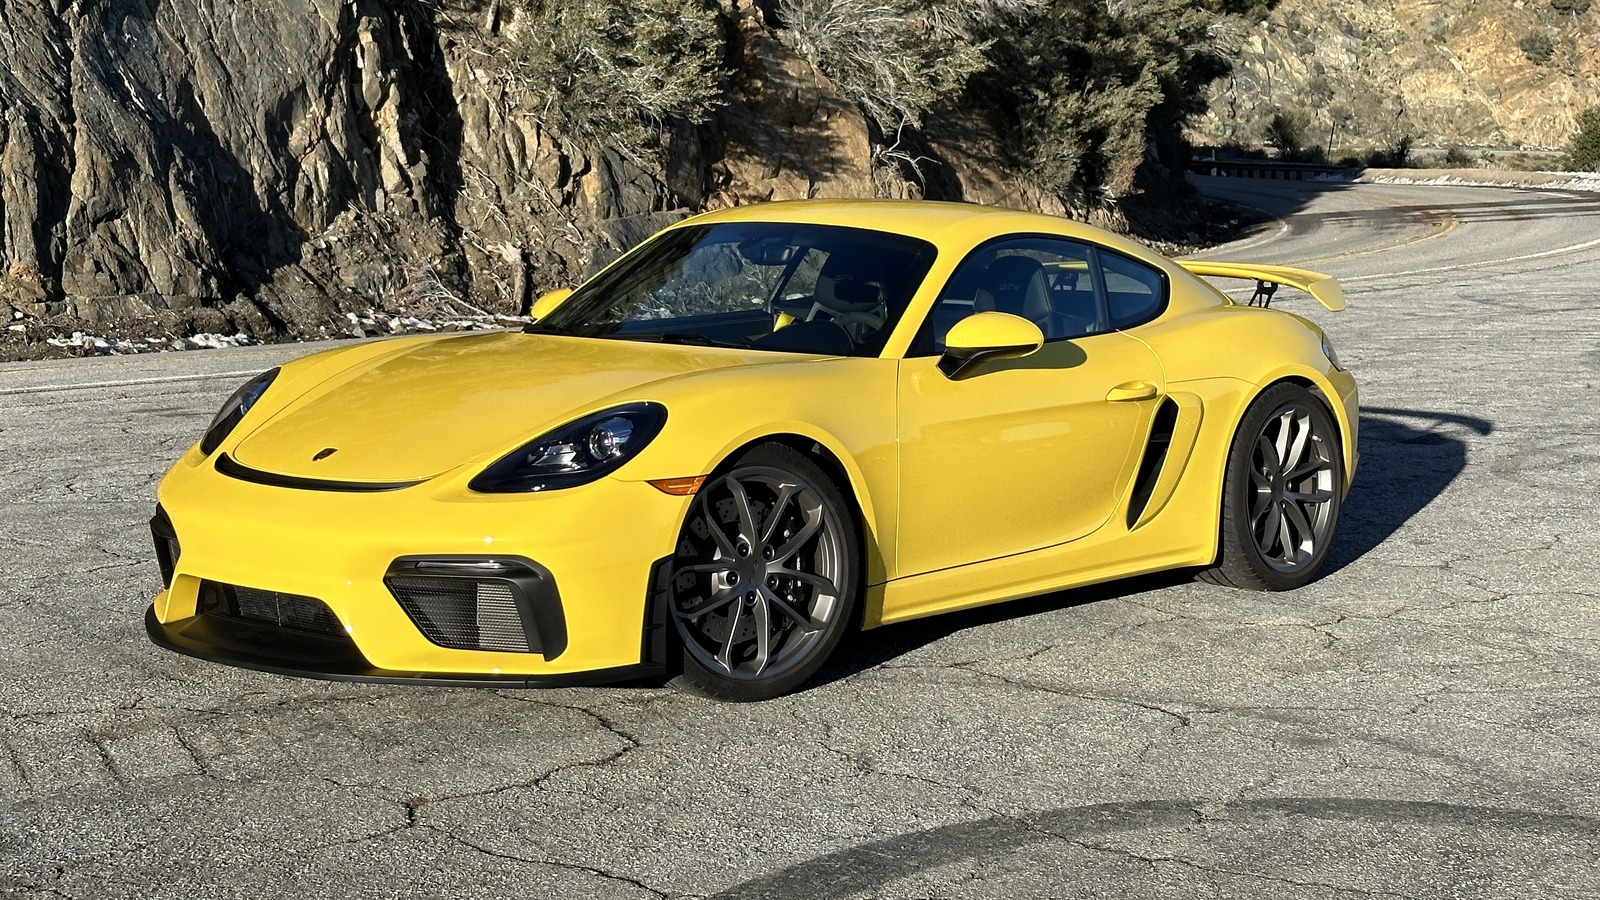 718 Cayman on road Price  Porsche 718 Cayman Features & Specs